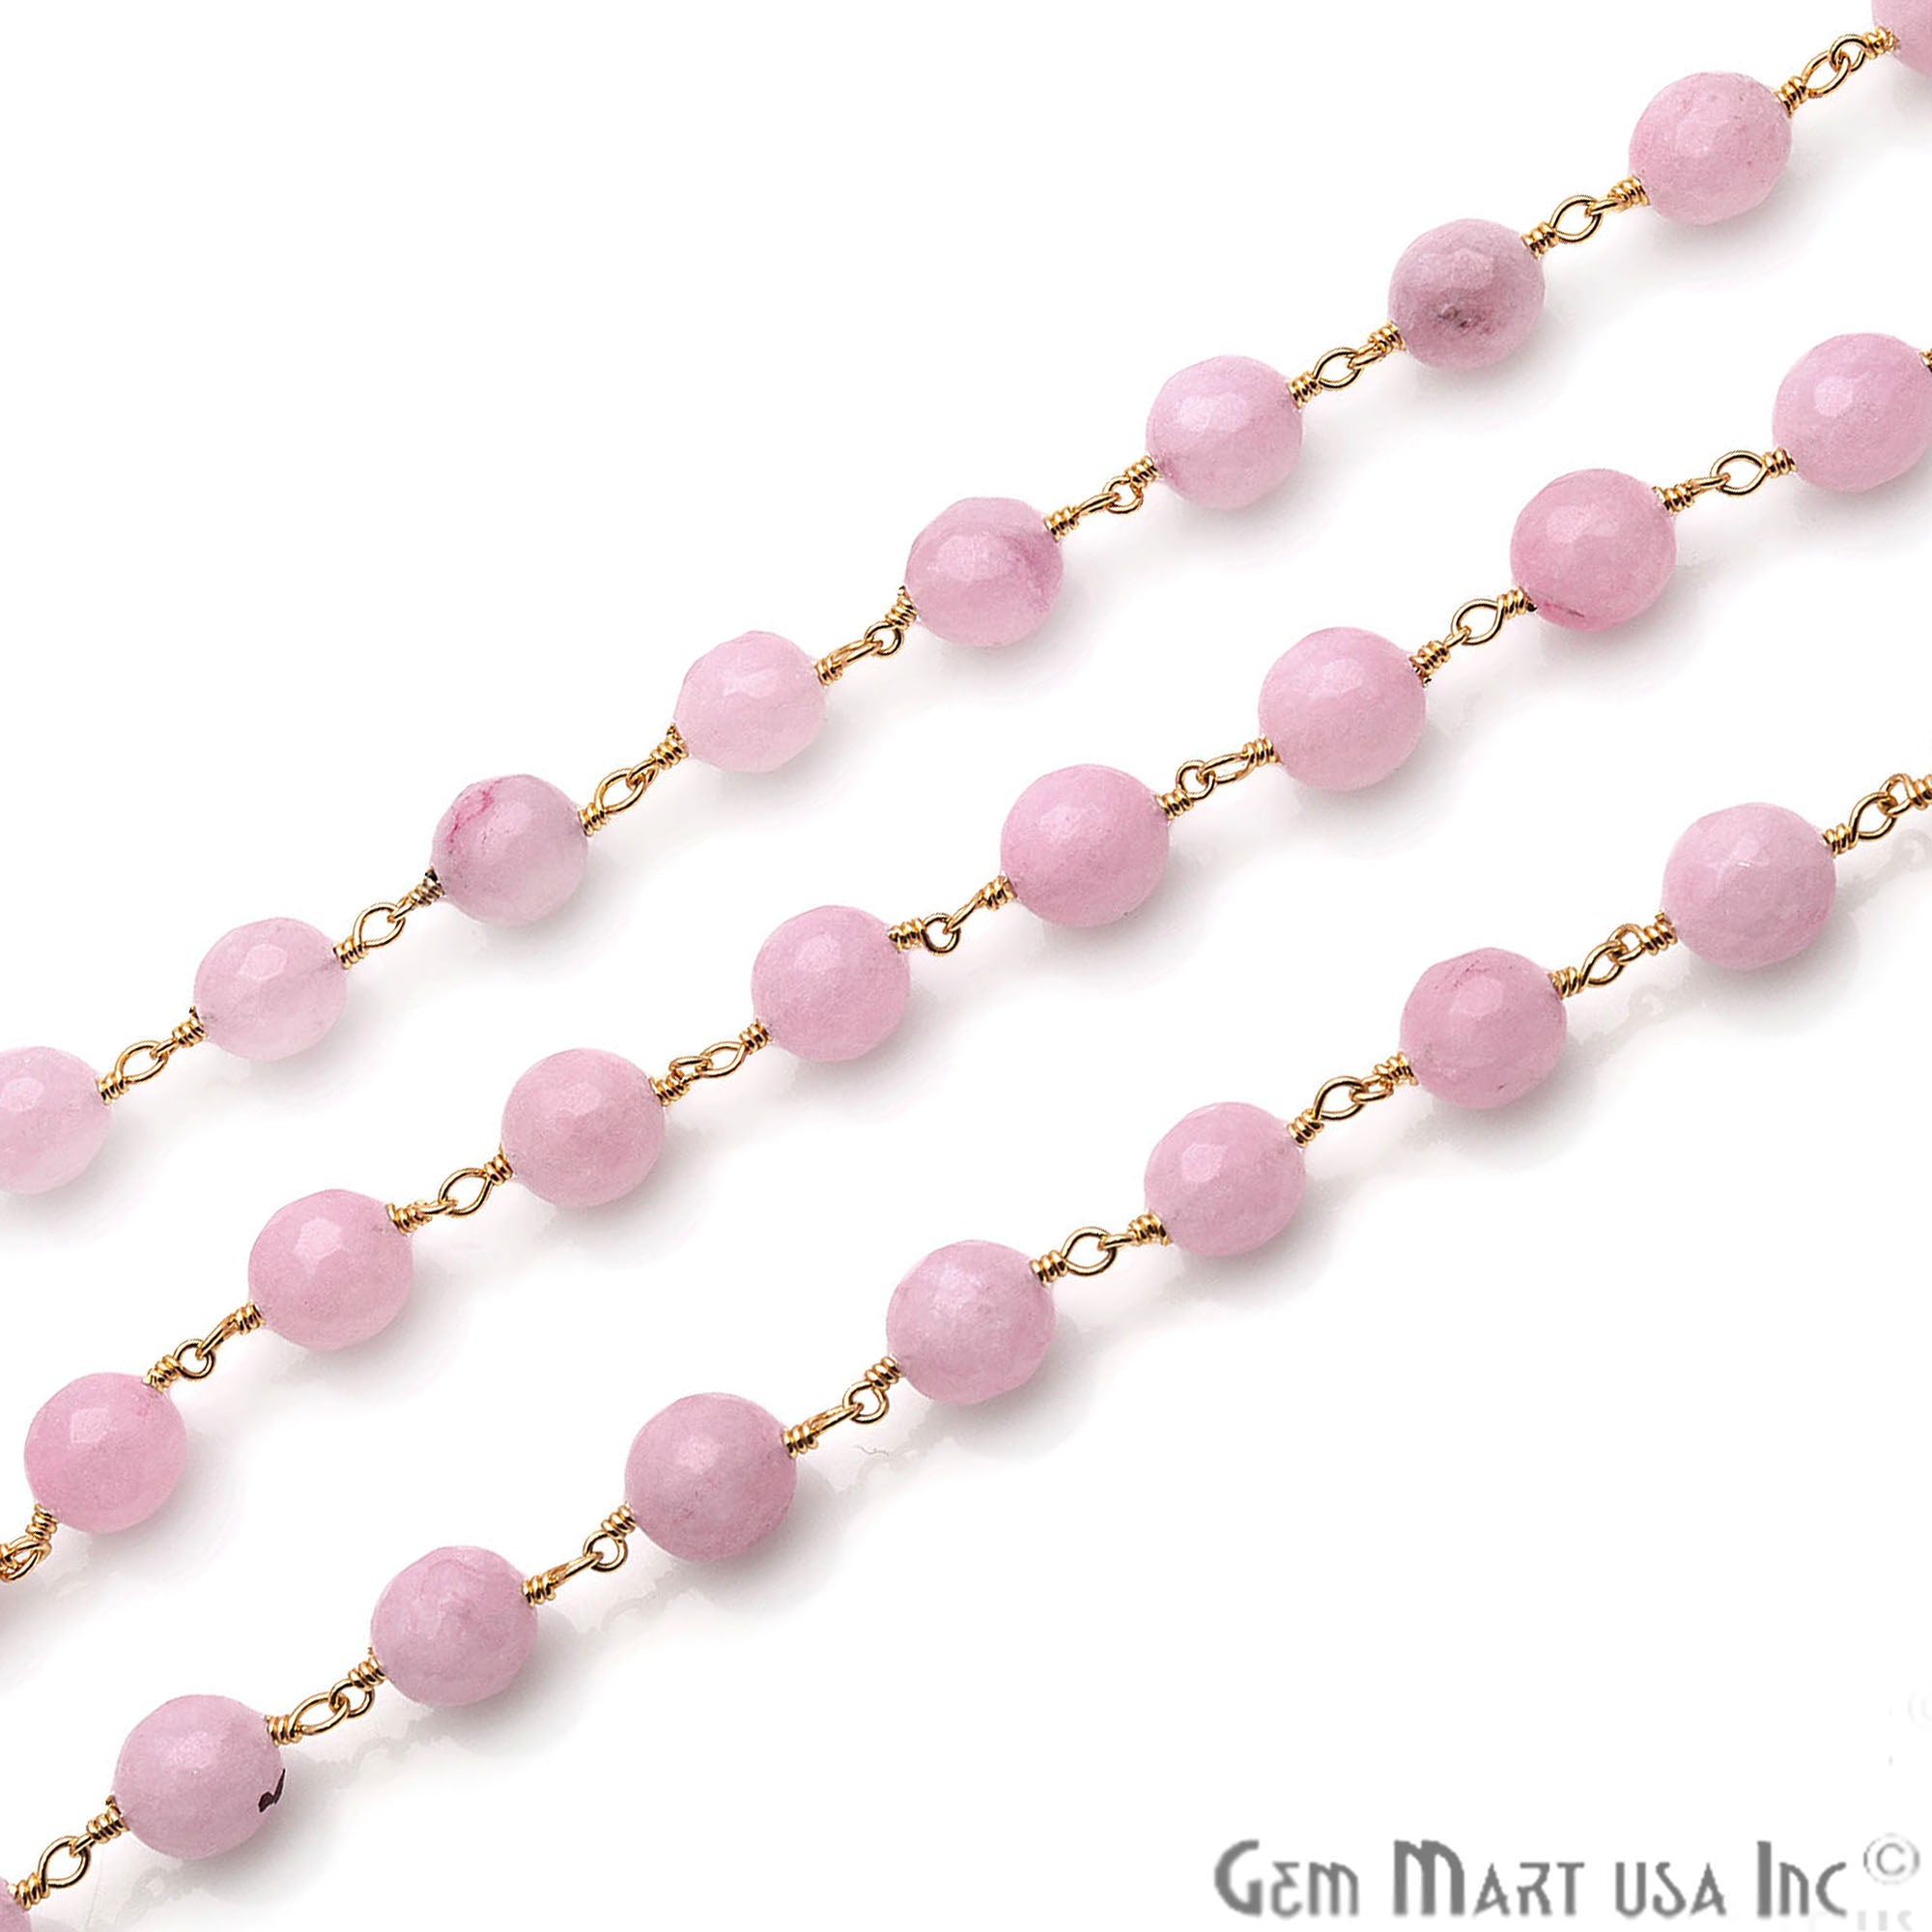 Lavender Jade 8mm Beads Gold Plated Wire Wrapped Rosary Chain - GemMartUSA (763881979951)